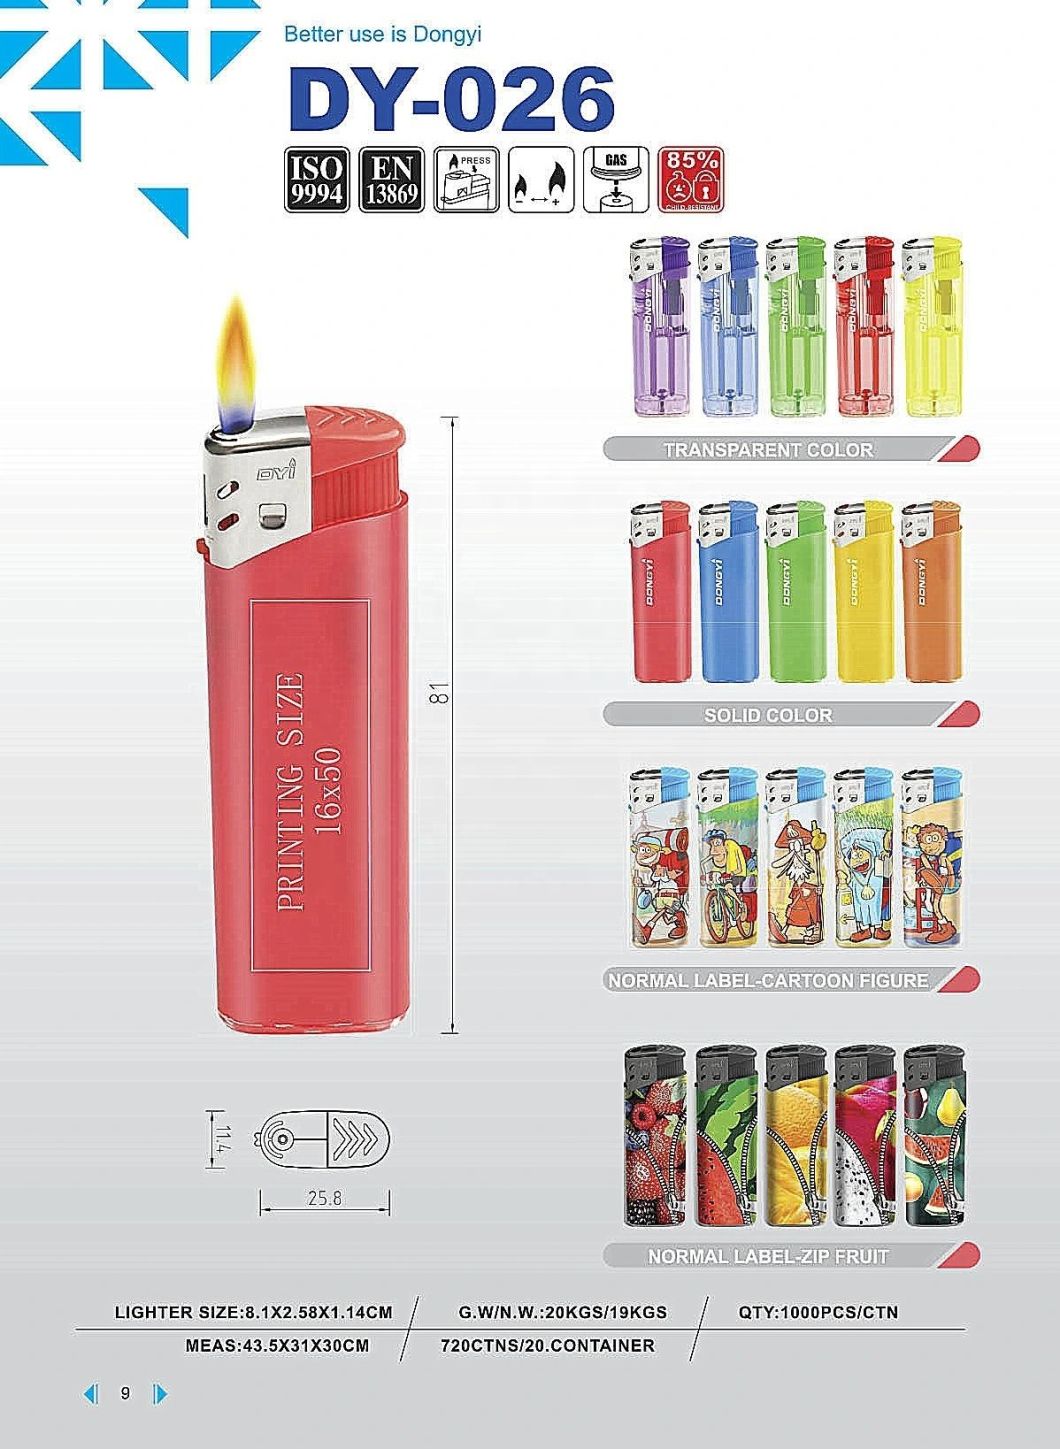 Hunan Dongyi Superior Quality Best-Sale Electric Gas Lighter with ISO9994 Certification